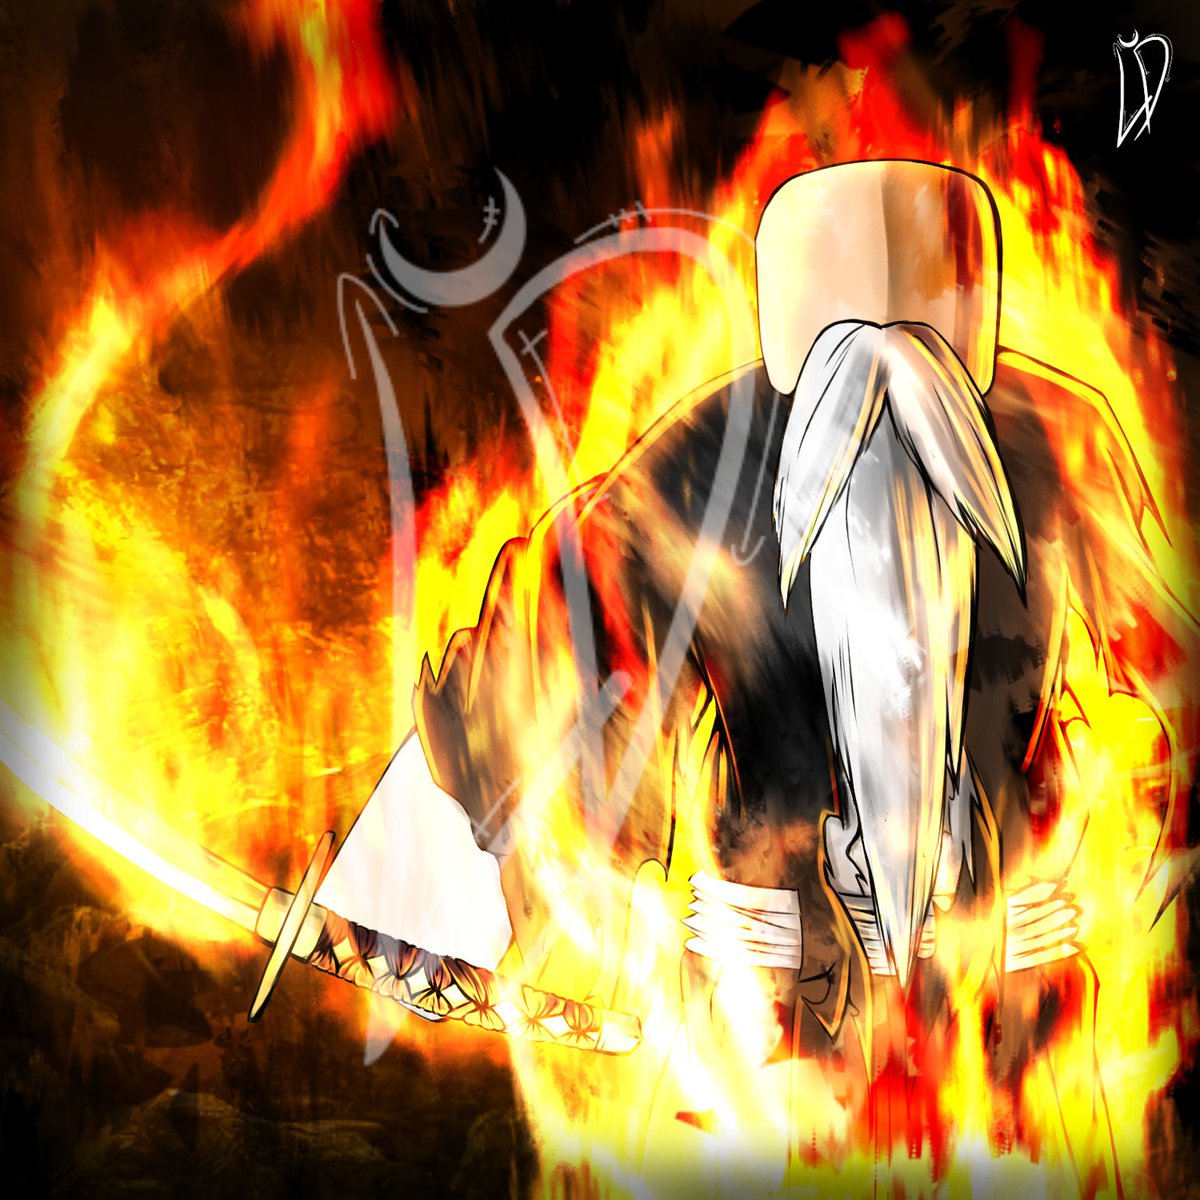 Lunar D Esigns Comms Open On Twitter Haven T Posted In A Bit But Here S Some Old Man On Fire Commission By Kuro Elite Prod Roblox Robloxart Robloxgfx Robloxdev Https T Co 6tkq3sko27 - fire robloxdev roblox robloxart roblo tweet added by